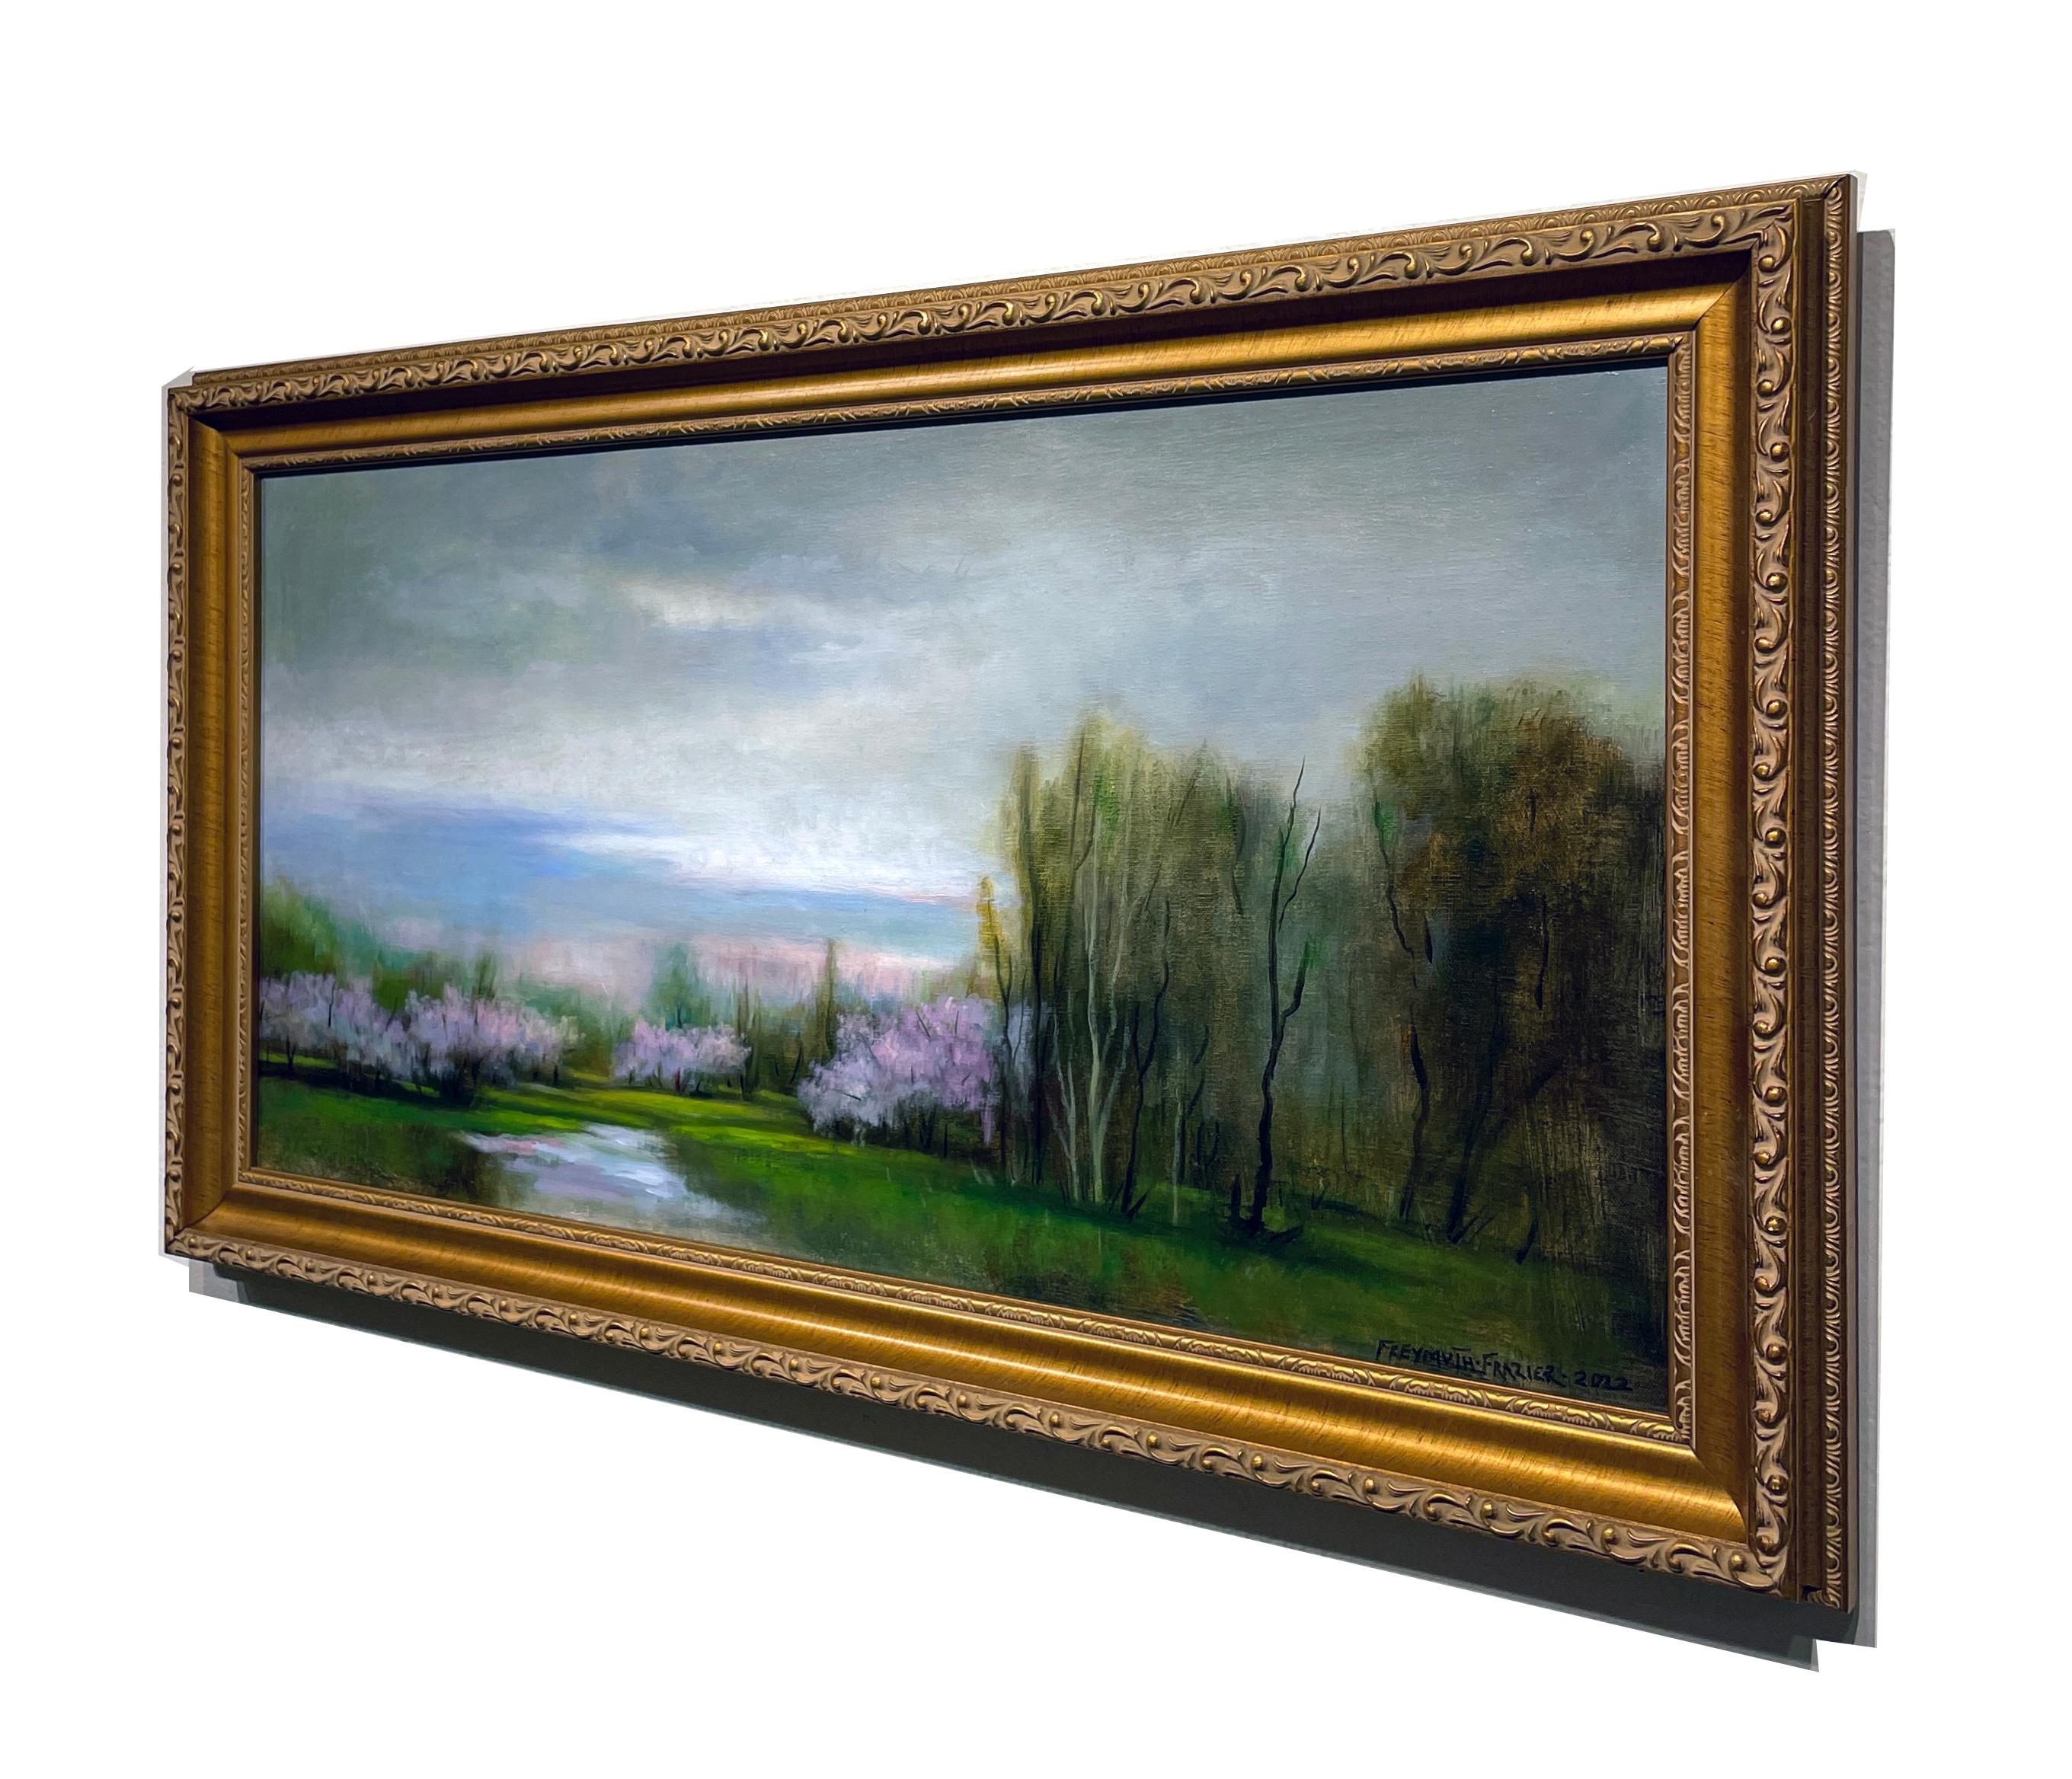 Cloud Cover - Early Spring Landscape with Pastel Flowering Trees, Original Oil  - Gray Landscape Painting by Rose Freymuth-Frazier